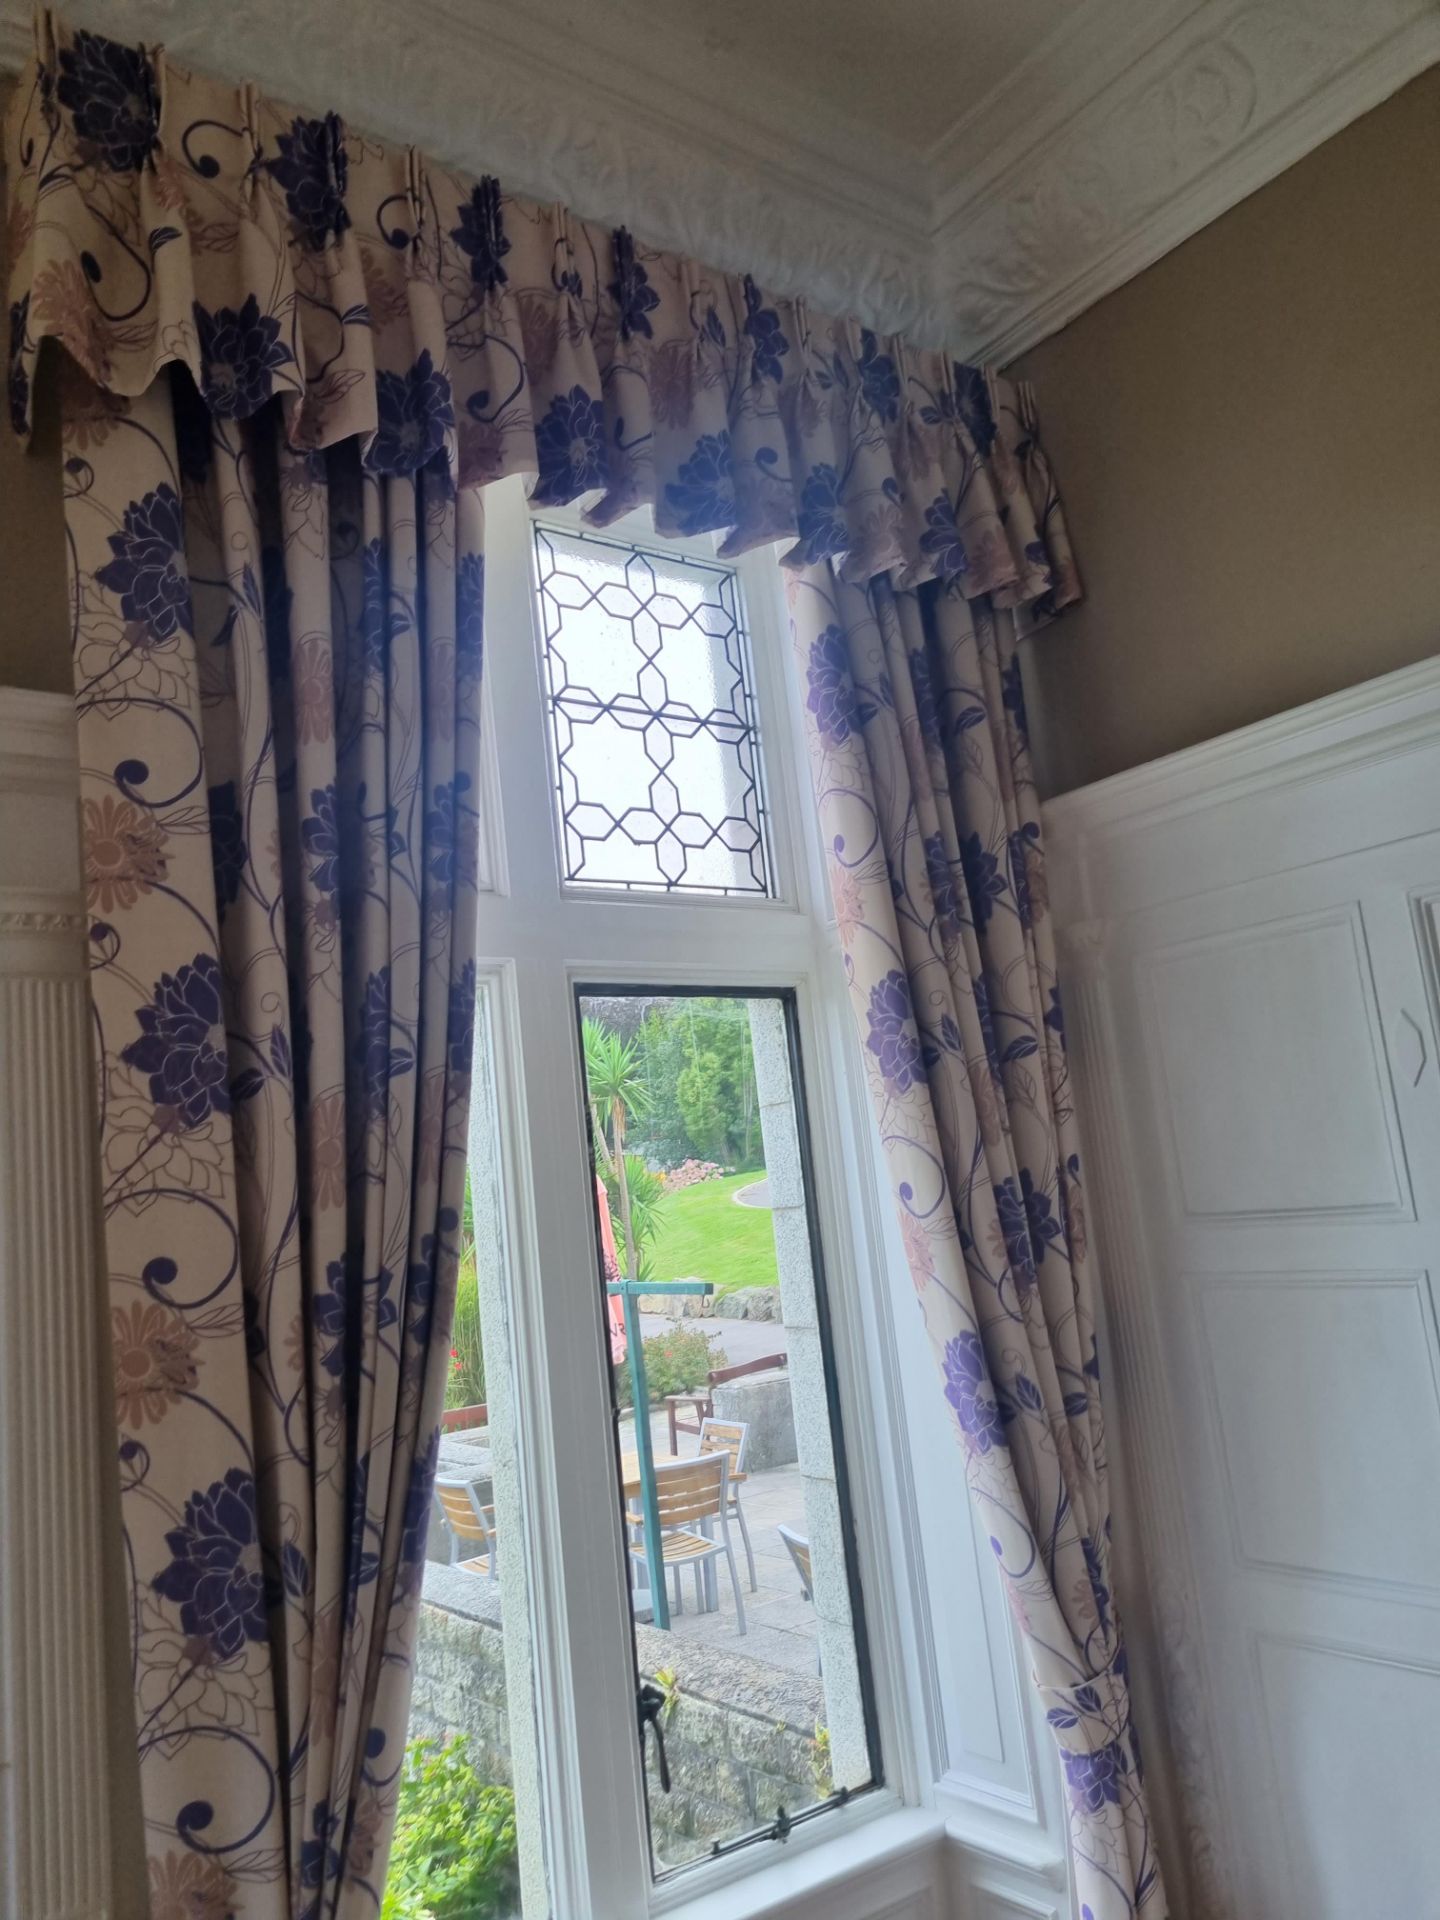 4 Sets Of Cream And Blue Fully Lined Curtains With Matching Pelmet And Tie Backs D3300mm W 1500mm, D - Image 5 of 5